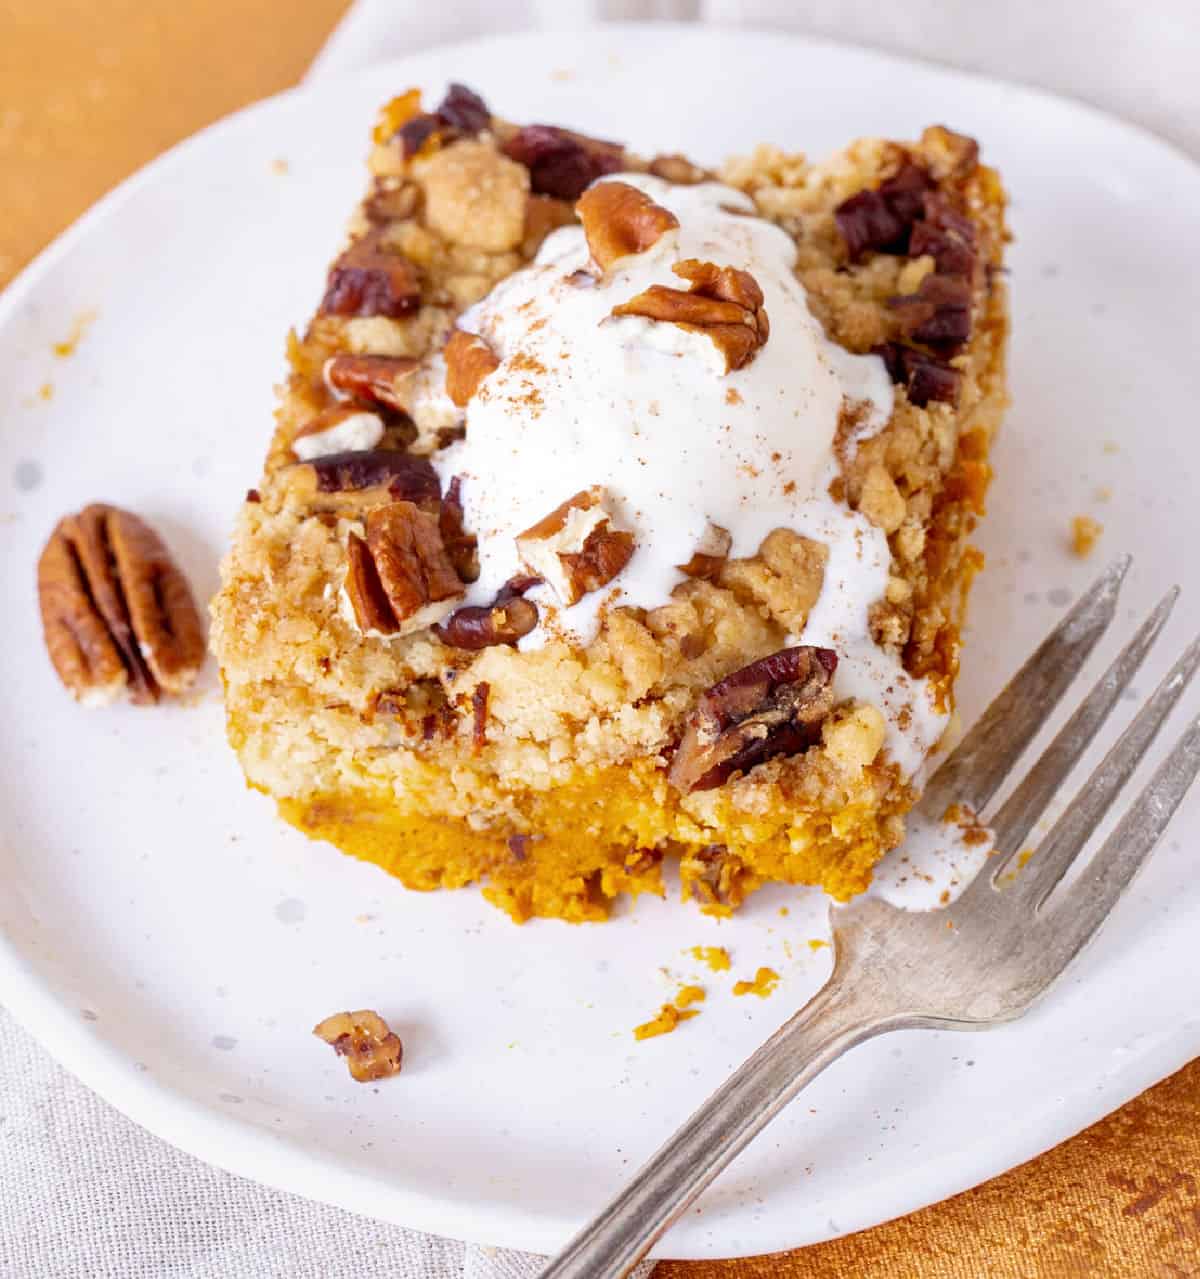 A serving of cream topped pumpkin crumb cake on white plate, silver fork, orange beige surface